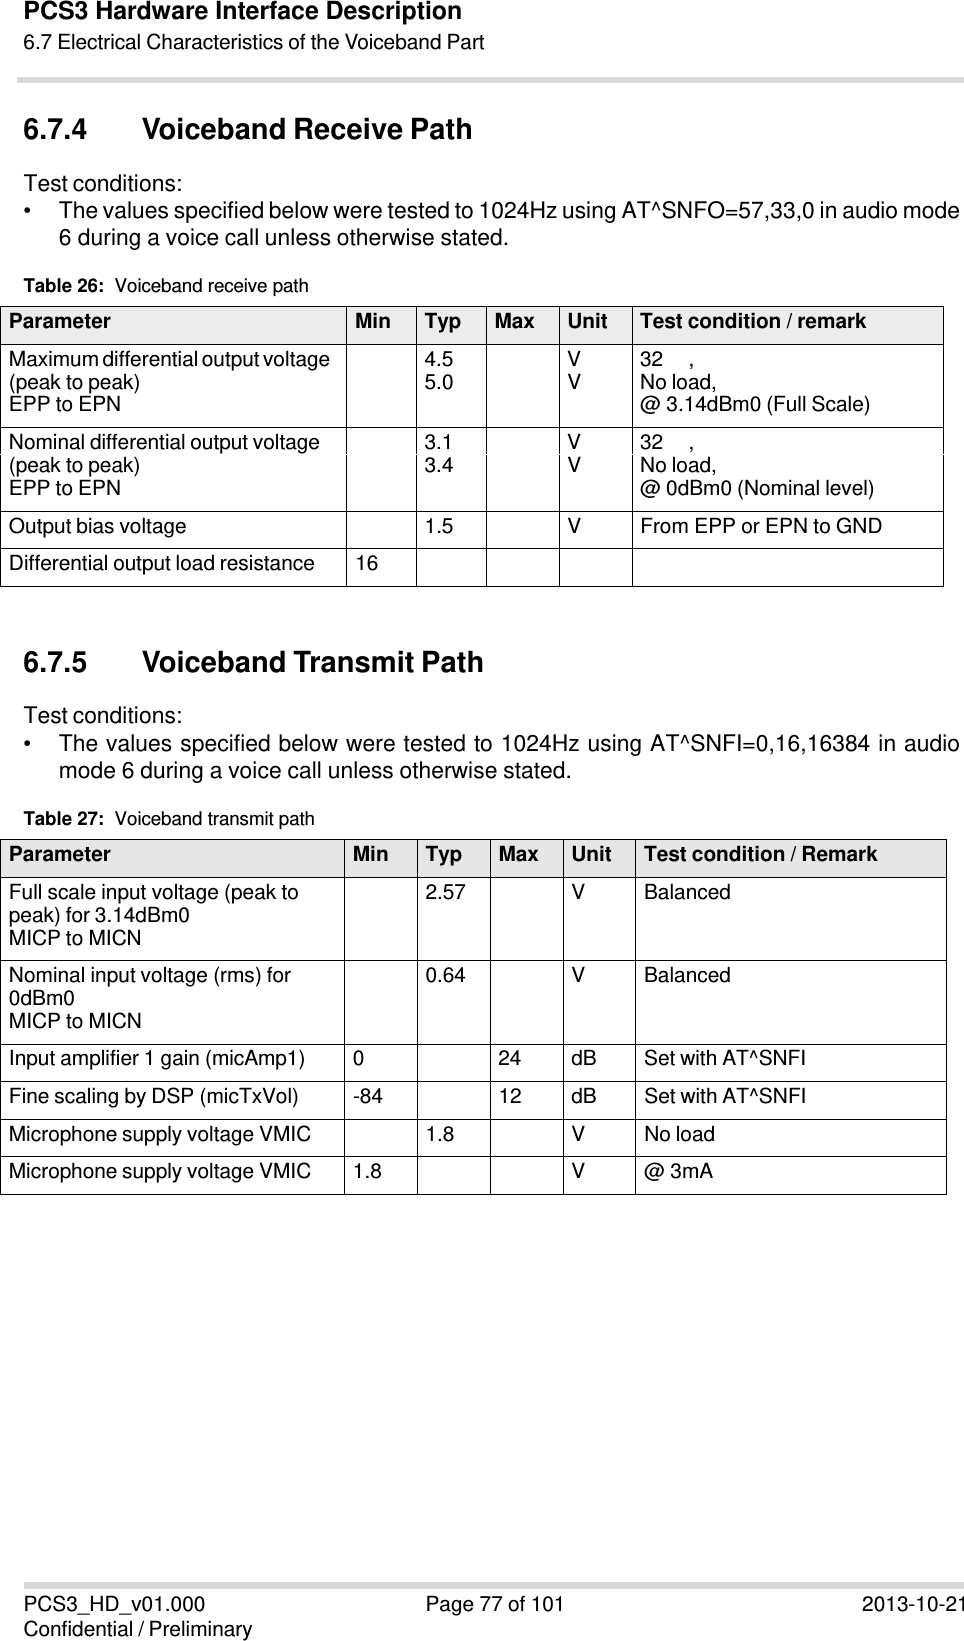 　PCS3 Hardware Interface Description6.7 Electrical Characteristics of the Voiceband PartPCS3_HD_v01.000 Confidential / Preliminary Page 77 of 101 2013-10-216.7.4 Voiceband Receive Path Test conditions: • The values specified below were tested to 1024Hz using AT^SNFO=57,33,0 in audio mode 6 during a voice call unless otherwise stated. Table 26:  Voiceband receive path Parameter Min Typ Max Unit Test condition / remark Maximum differential output voltage  4.5  V  32 　, (peak to peak)  5.0 V No load,EPP to EPN  @ 3.14dBm0 (Full Scale) Nominal differential output voltage  3.1  V  32 　, (peak to peak)  3.4 V No load,EPP to EPN  @ 0dBm0 (Nominal level) Output bias voltage  1.5  V  From EPP or EPN to GND Differential output load resistance  16   　6.7.5 Voiceband Transmit Path Test conditions: • The values specified below were tested to 1024Hz using AT^SNFI=0,16,16384 in audio mode 6 during a voice call unless otherwise stated. Table 27:  Voiceband transmit path Parameter Min Typ Max Unit Test condition / Remark Full scale input voltage (peak to peak) for 3.14dBm0 MICP to MICN 2.57  V Balanced Nominal input voltage (rms) for 0dBm0 MICP to MICN 0.64  V Balanced Input amplifier 1 gain (micAmp1)  0  24  dB  Set with AT^SNFI Fine scaling by DSP (micTxVol)  -84  12 dB Set with AT^SNFI Microphone supply voltage VMIC  1.8  V No load Microphone supply voltage VMIC  1.8   V @ 3mA 